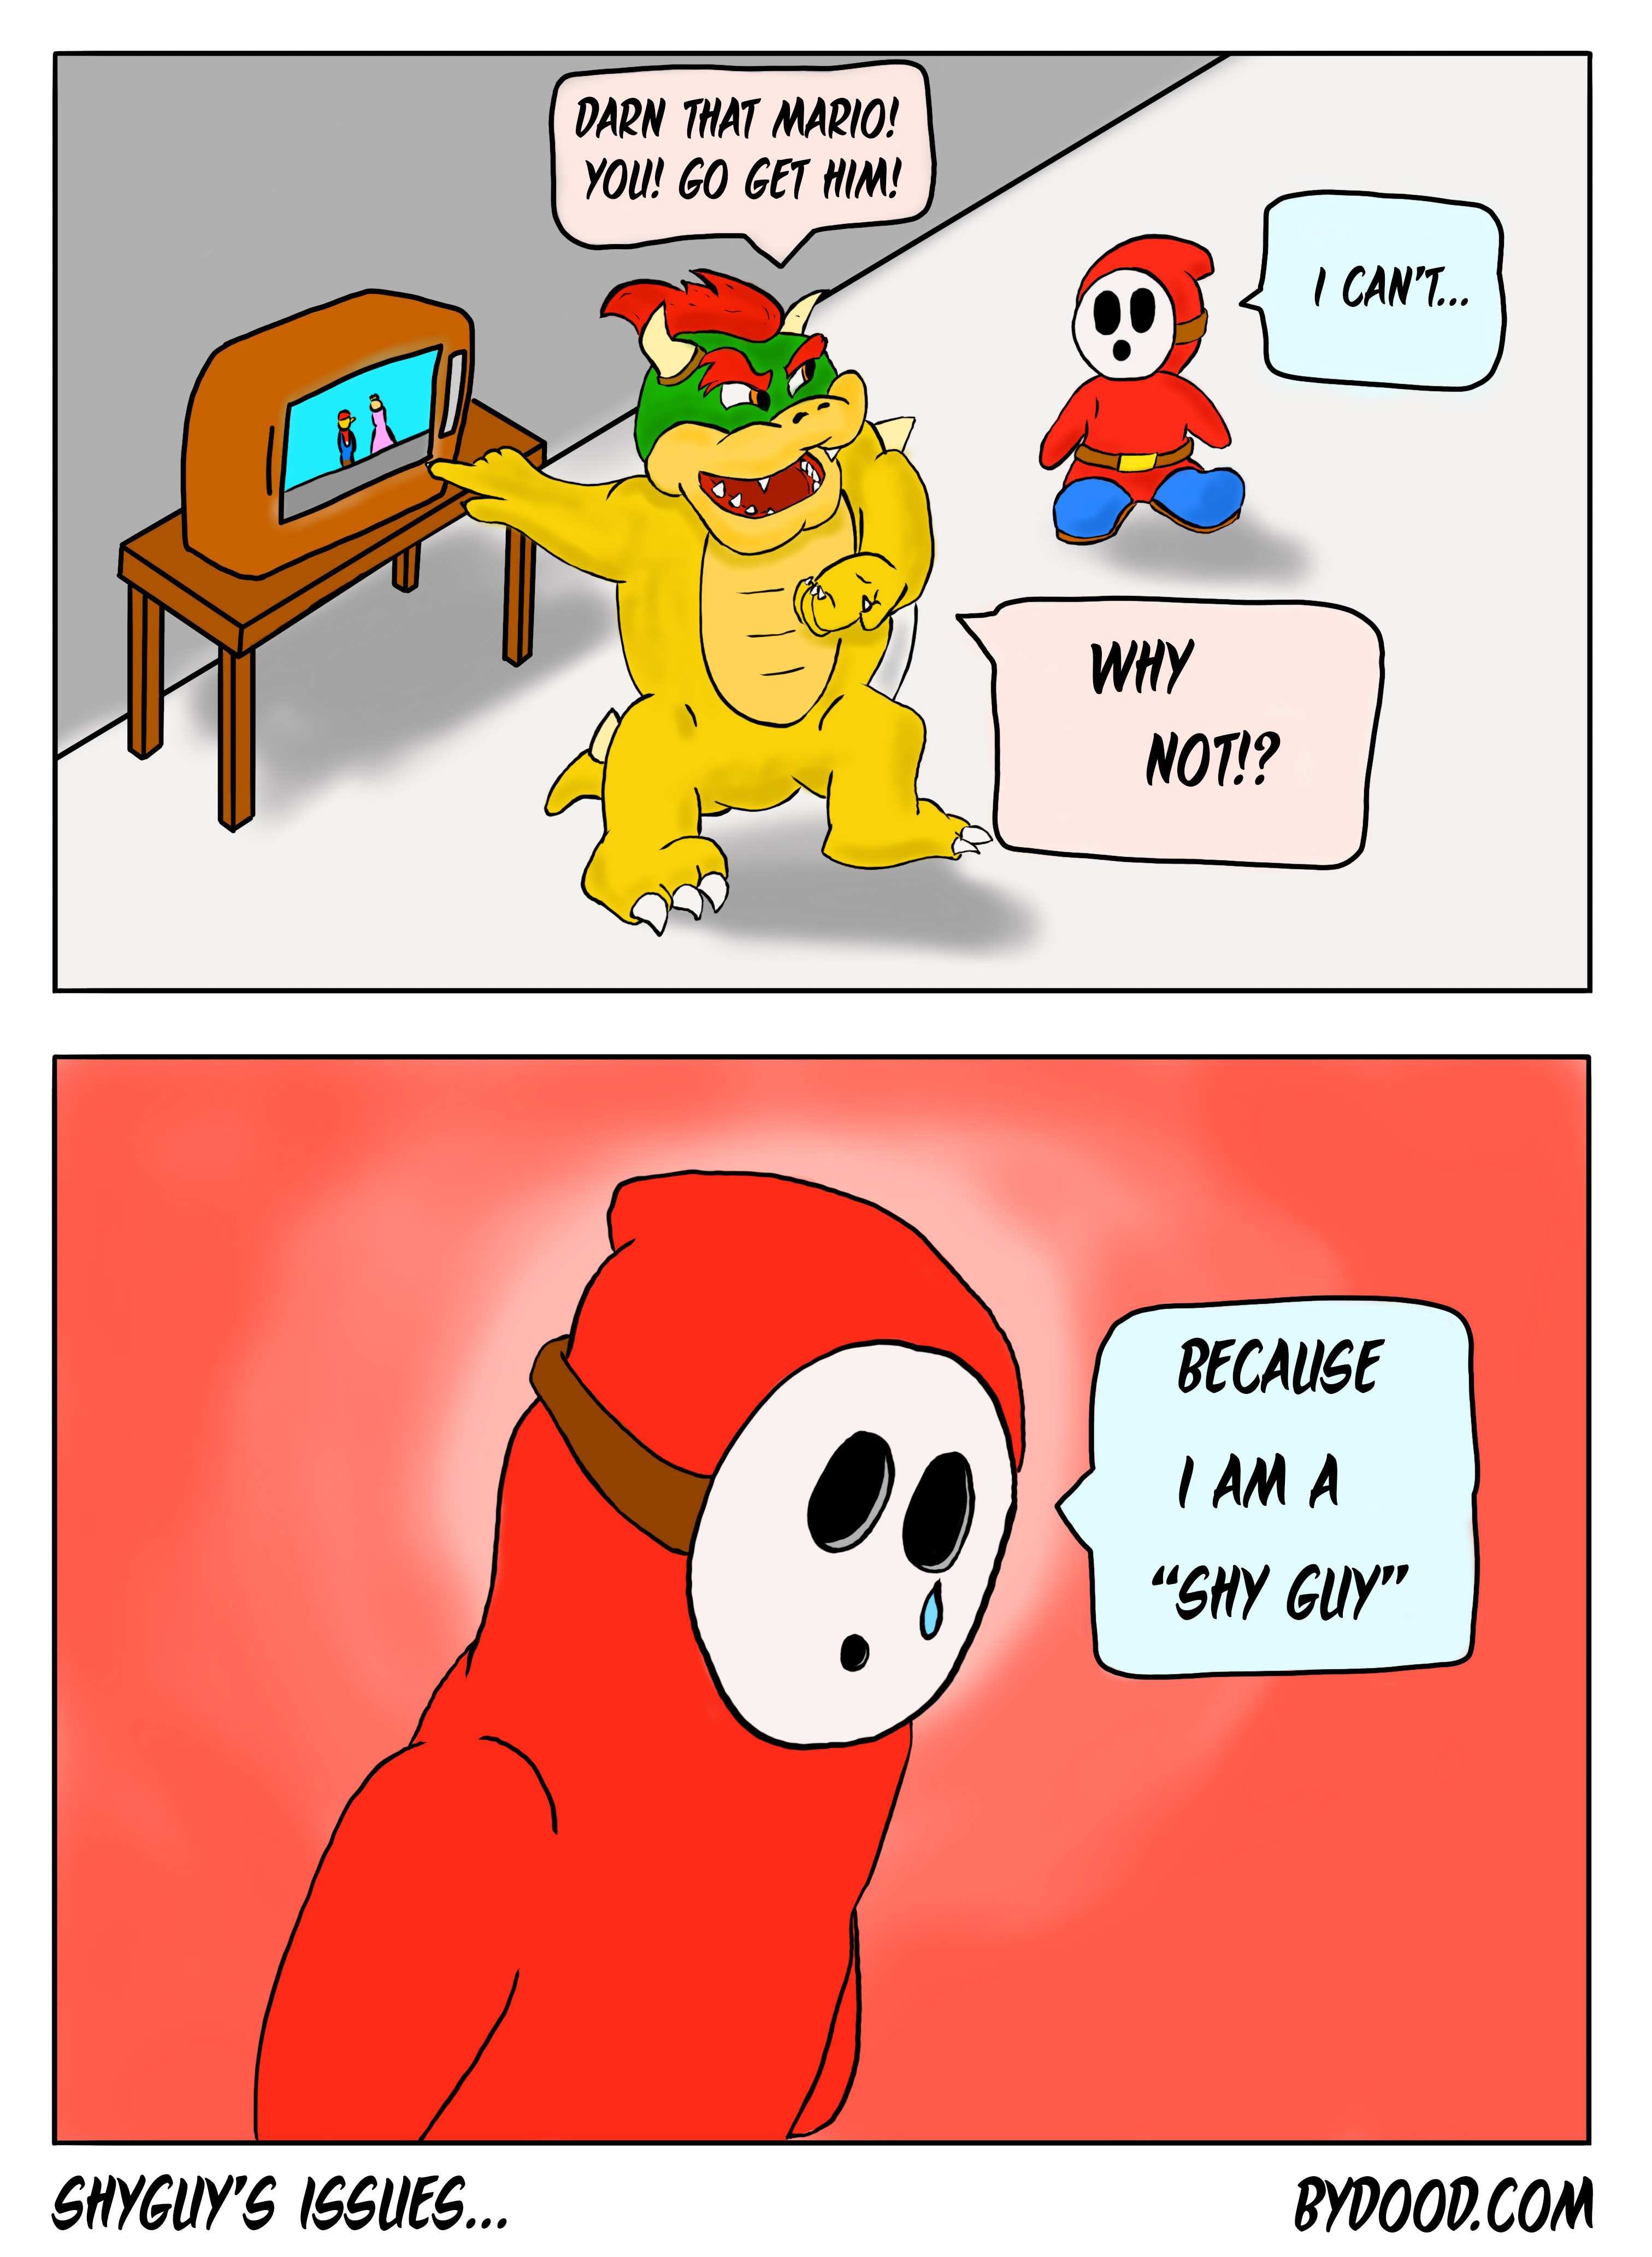 Shy Guy issues...